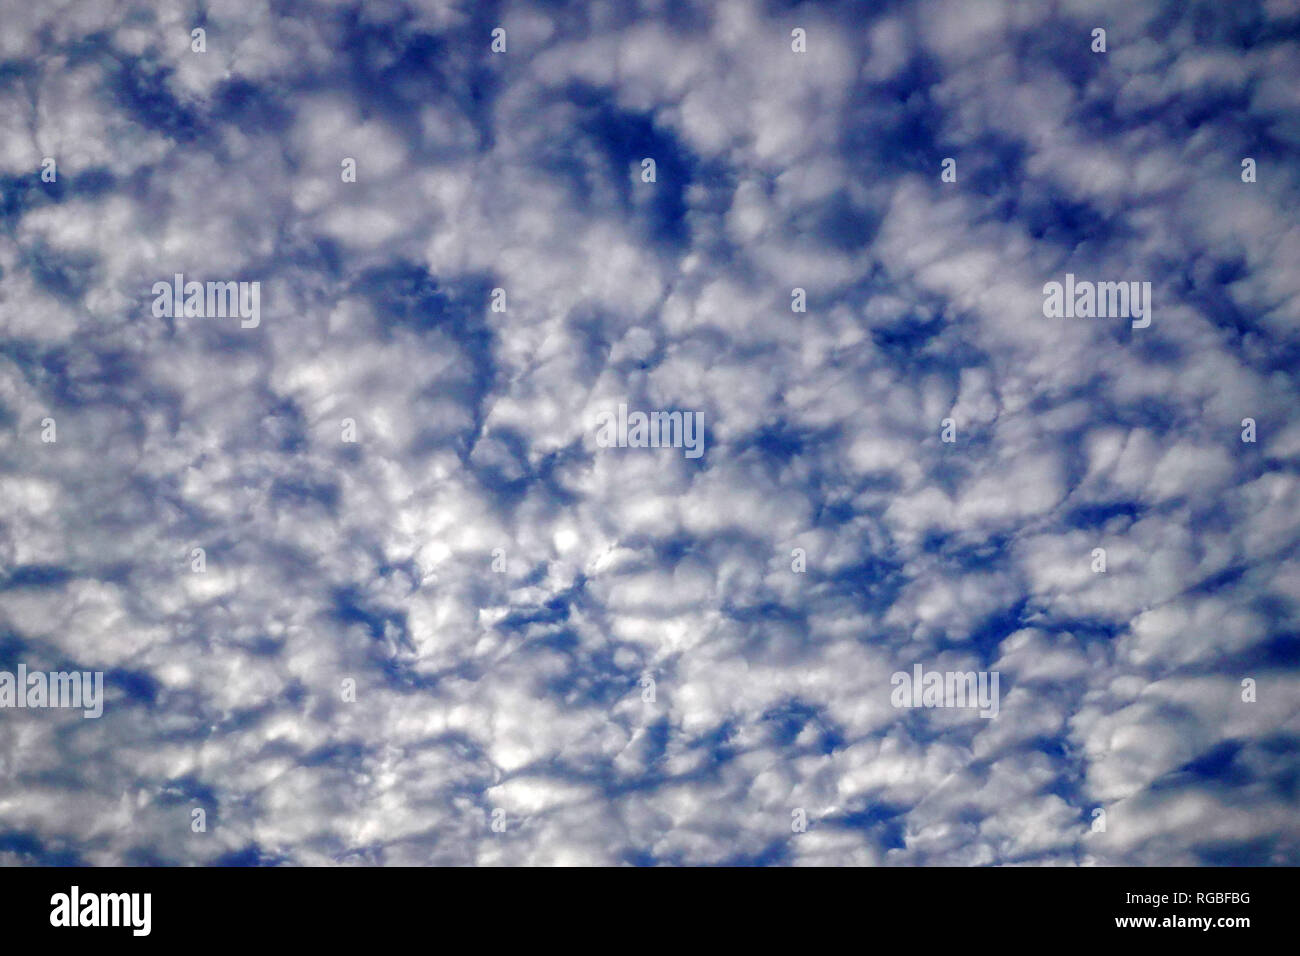 Clouds form a unique pattern in the blu sky. Stock Photo